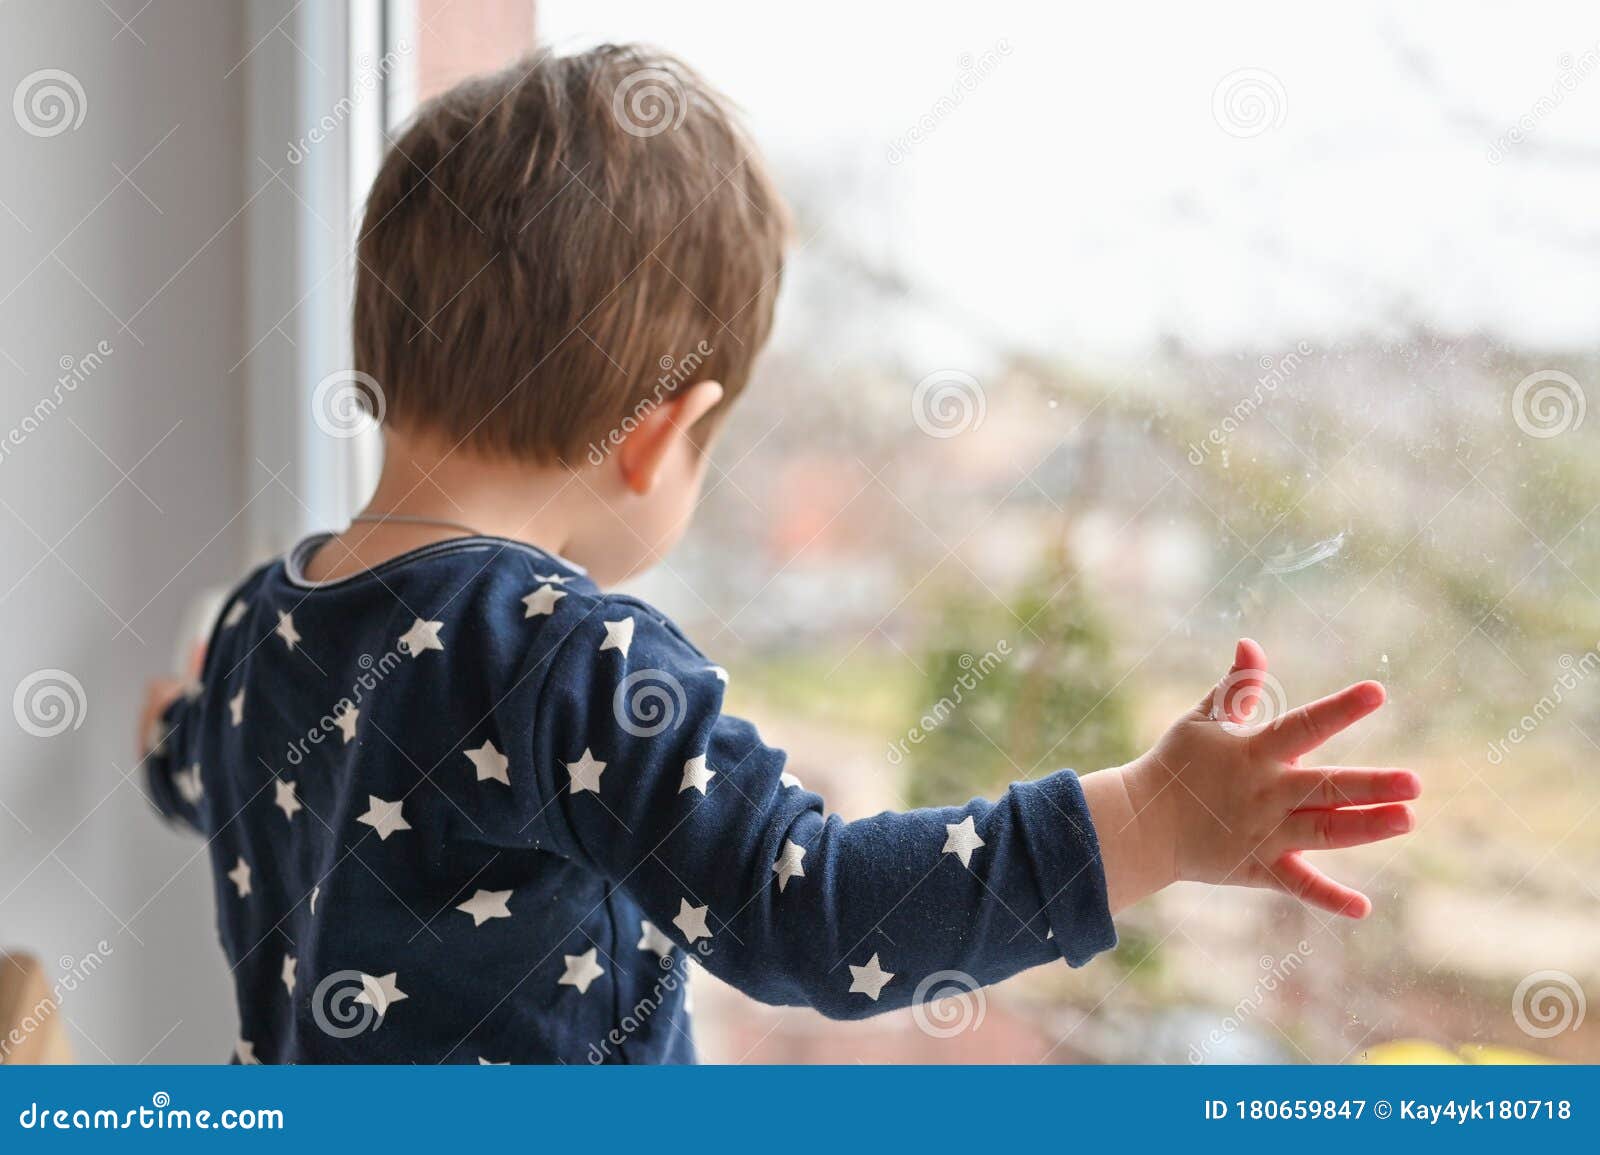 Lonely Child by the Window. Sad Lonely Child Sitting Alone on the ...